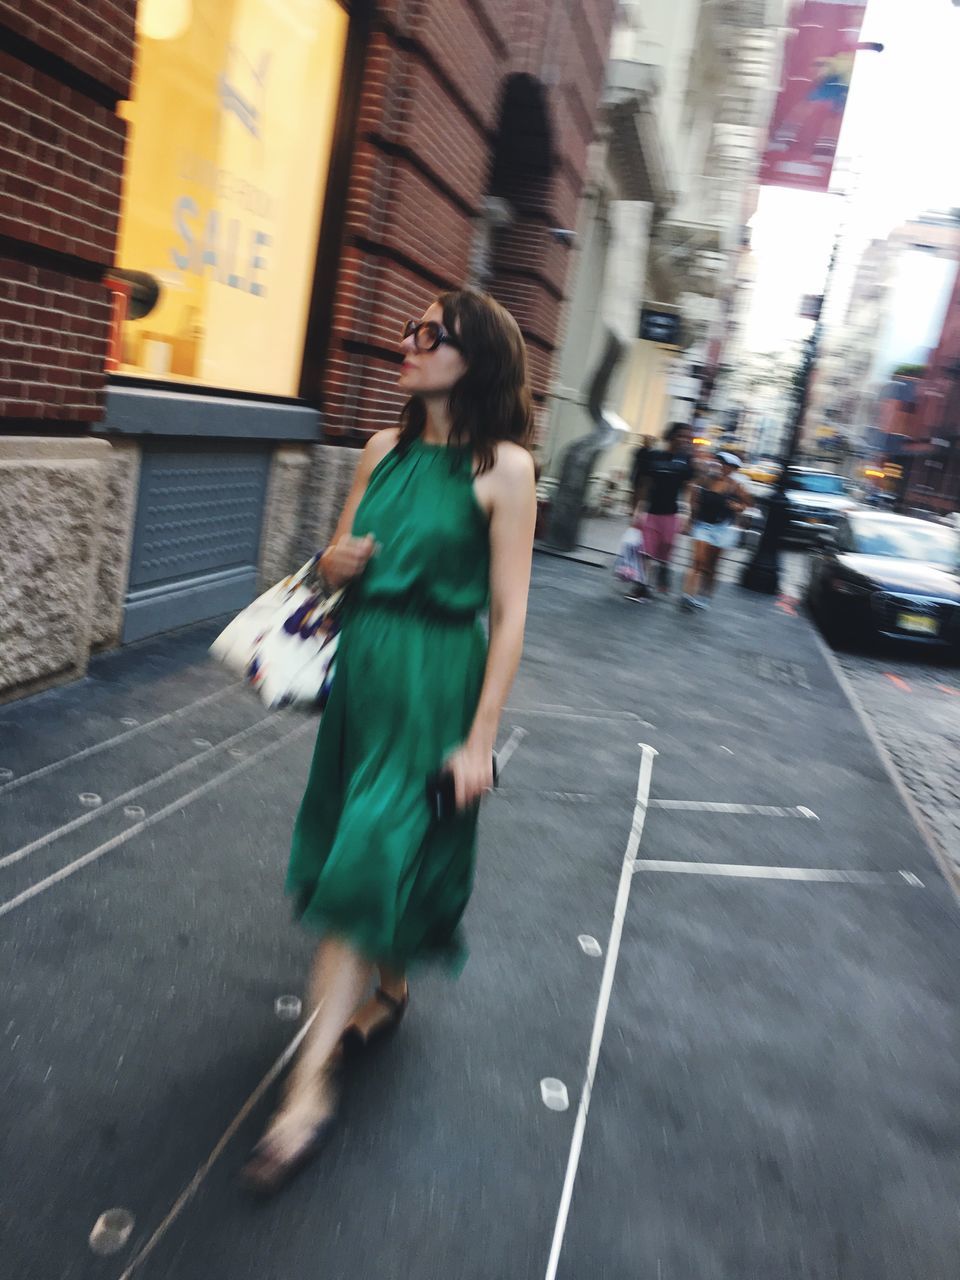 blurred motion, motion, real people, one person, full length, walking, lifestyles, day, architecture, building exterior, outdoors, people